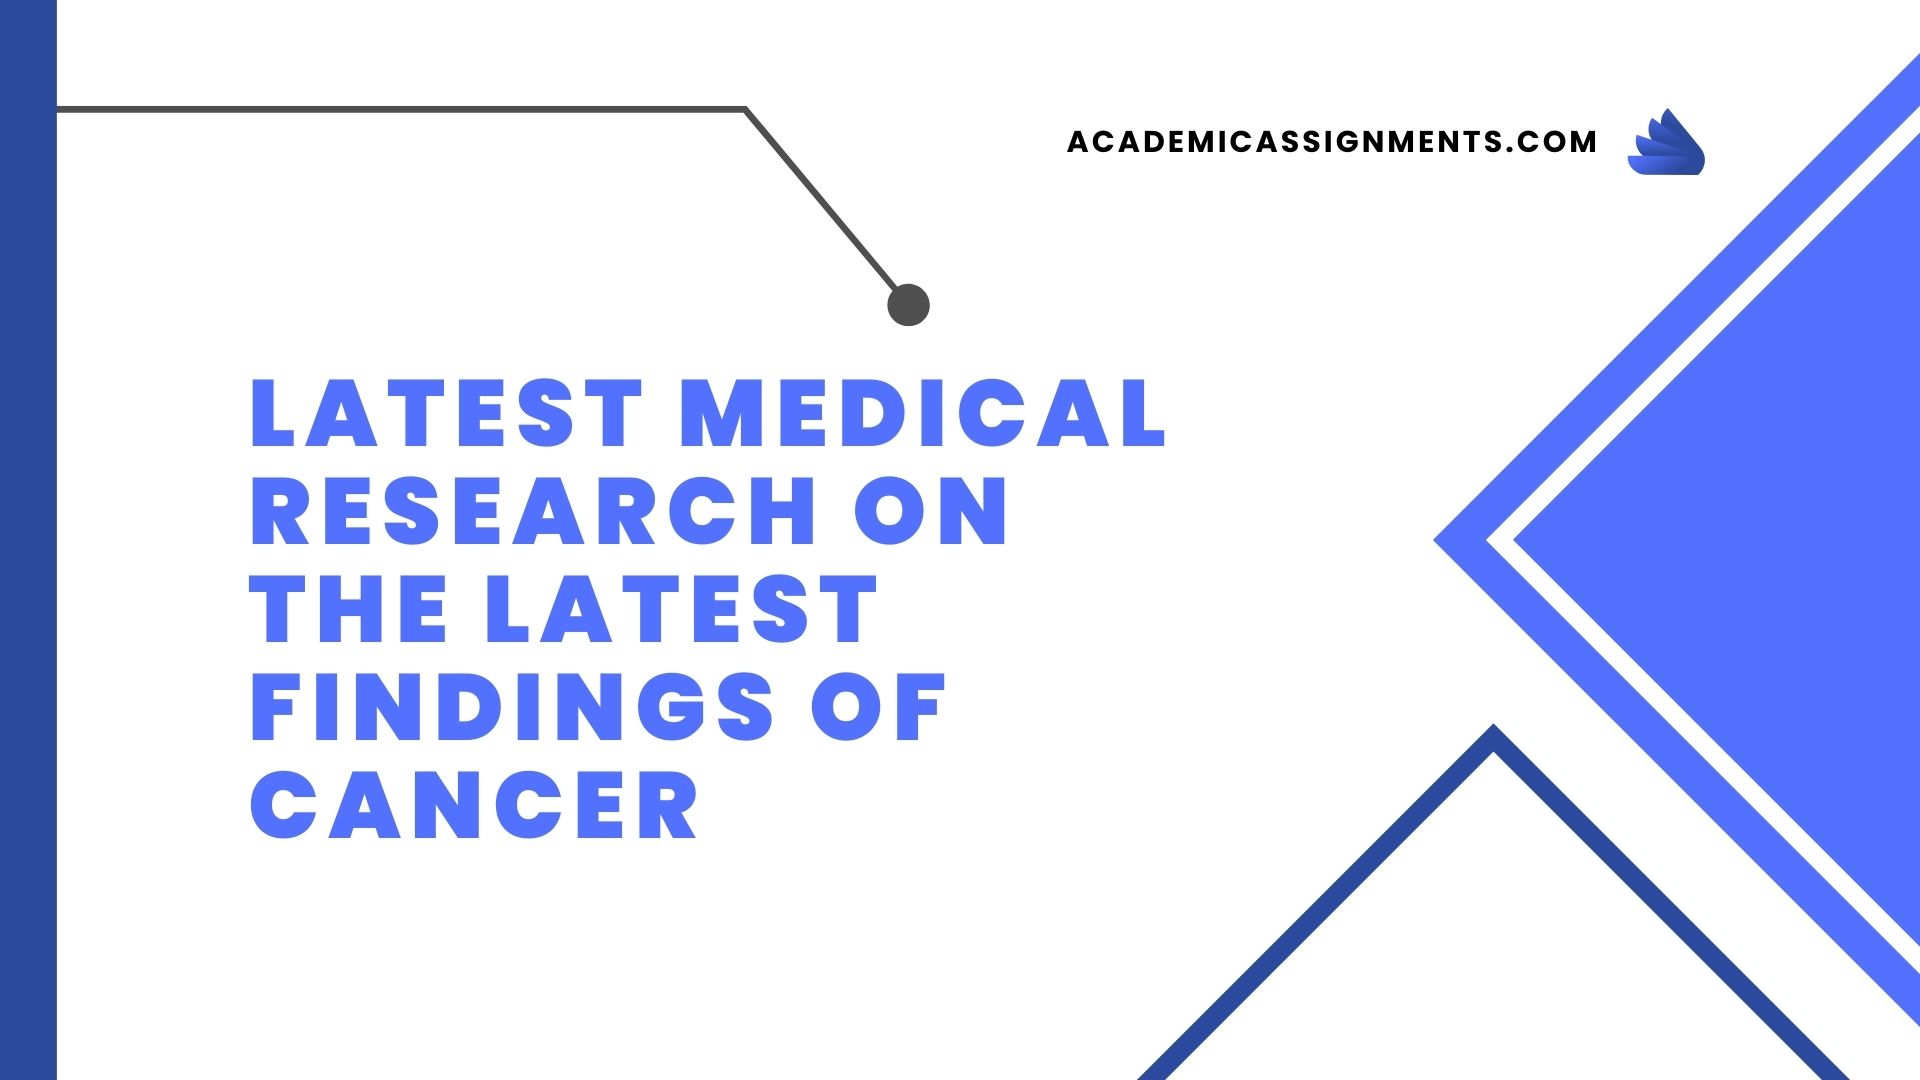 Latest Medical Research on the Latest Findings of Cancer